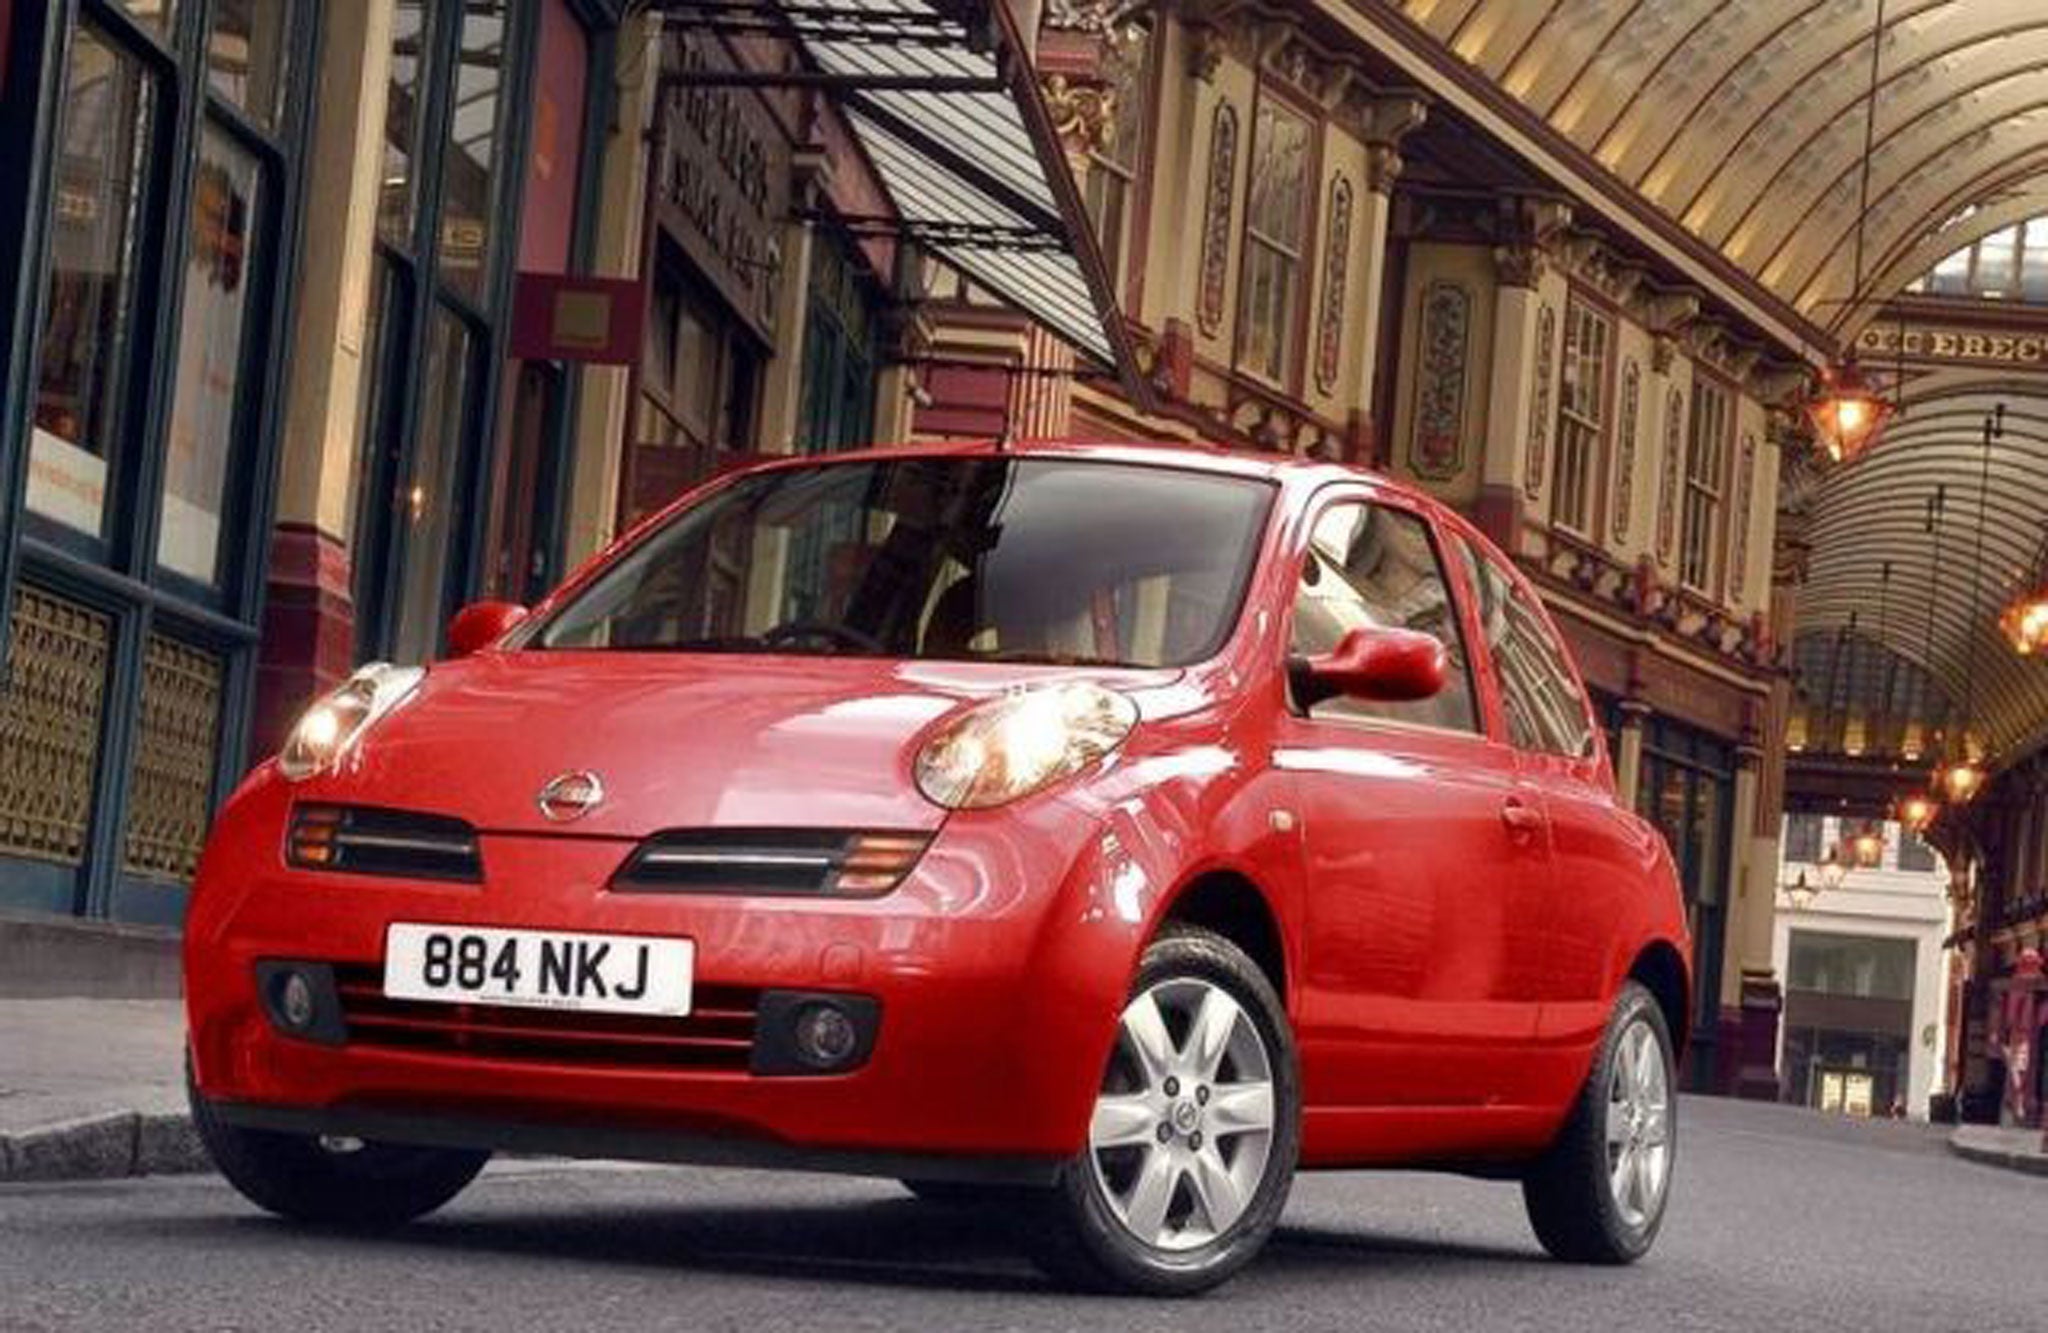 The Nissan Micra is easy to drive and live with